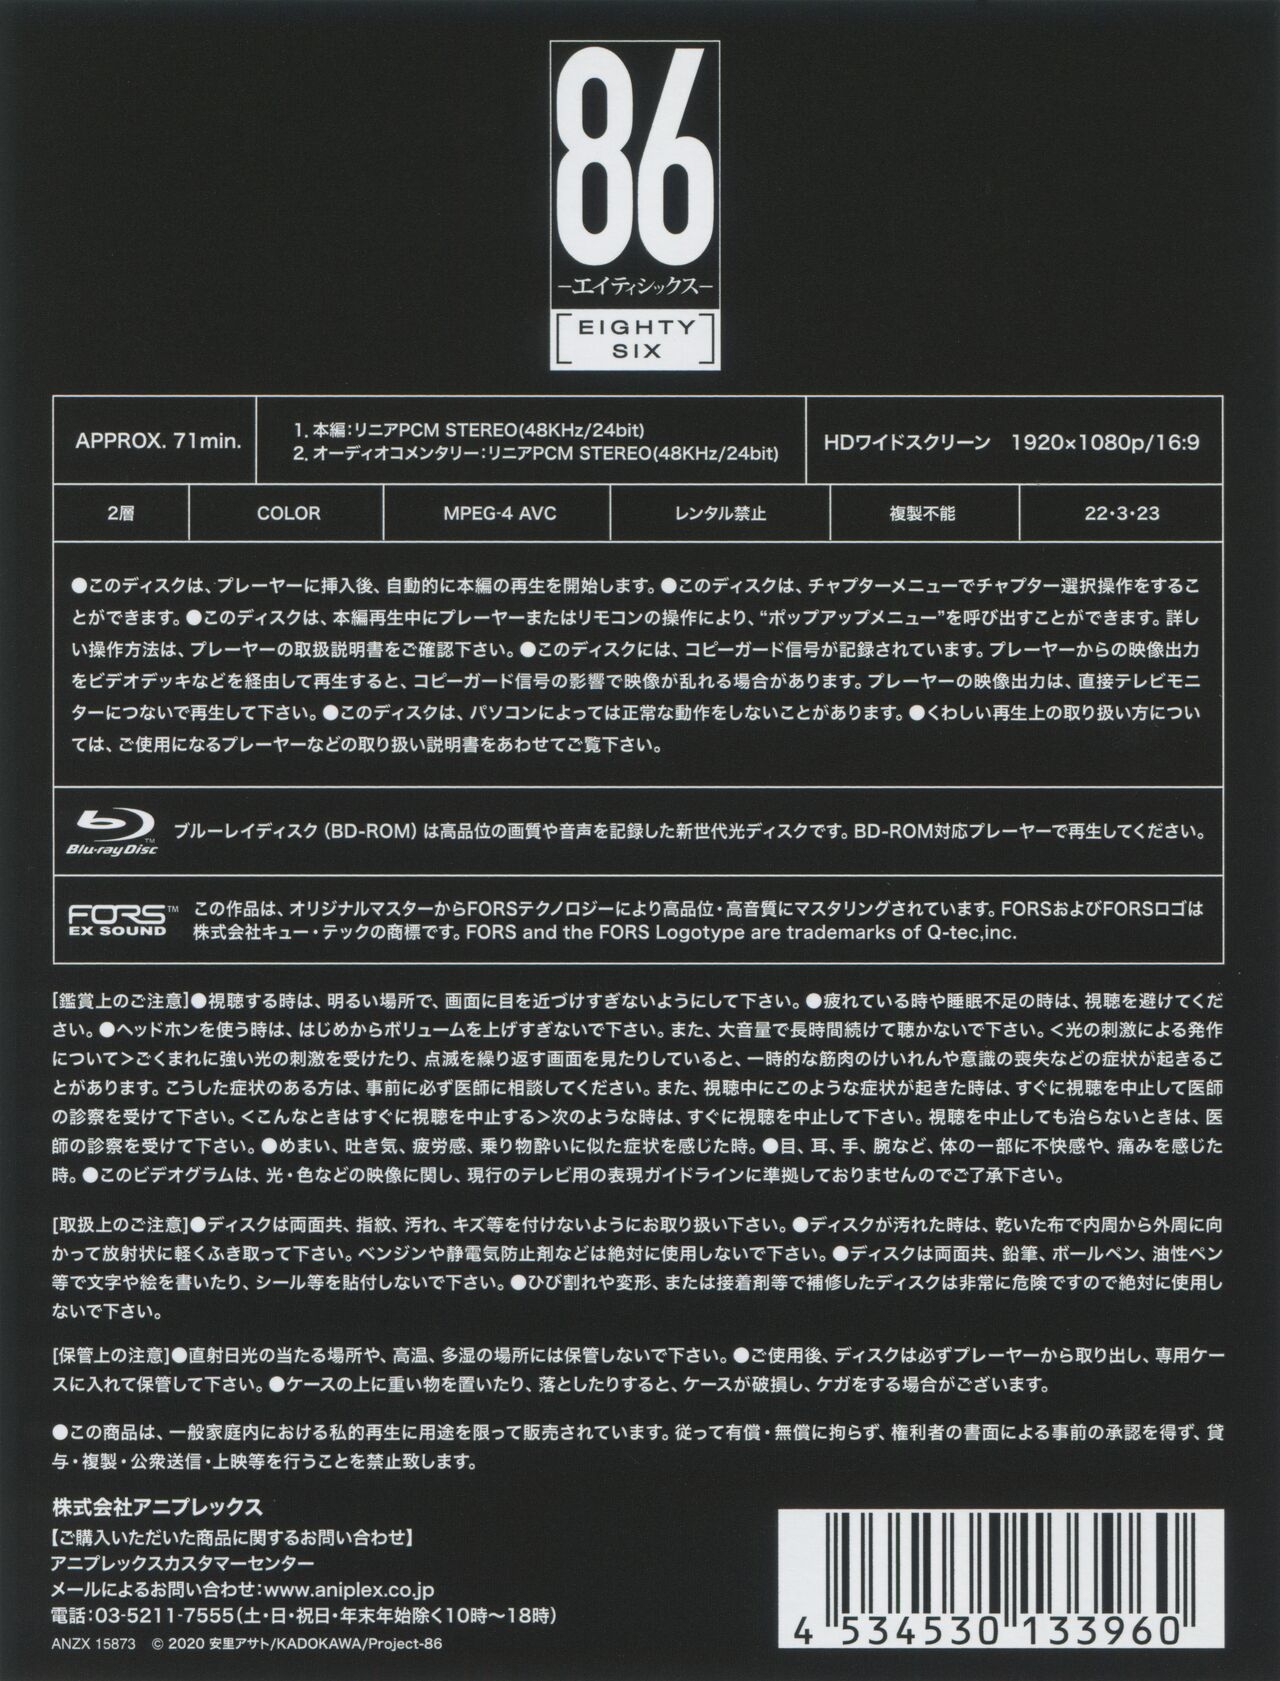 86 Eighty Six BD Scans + Booklet 238